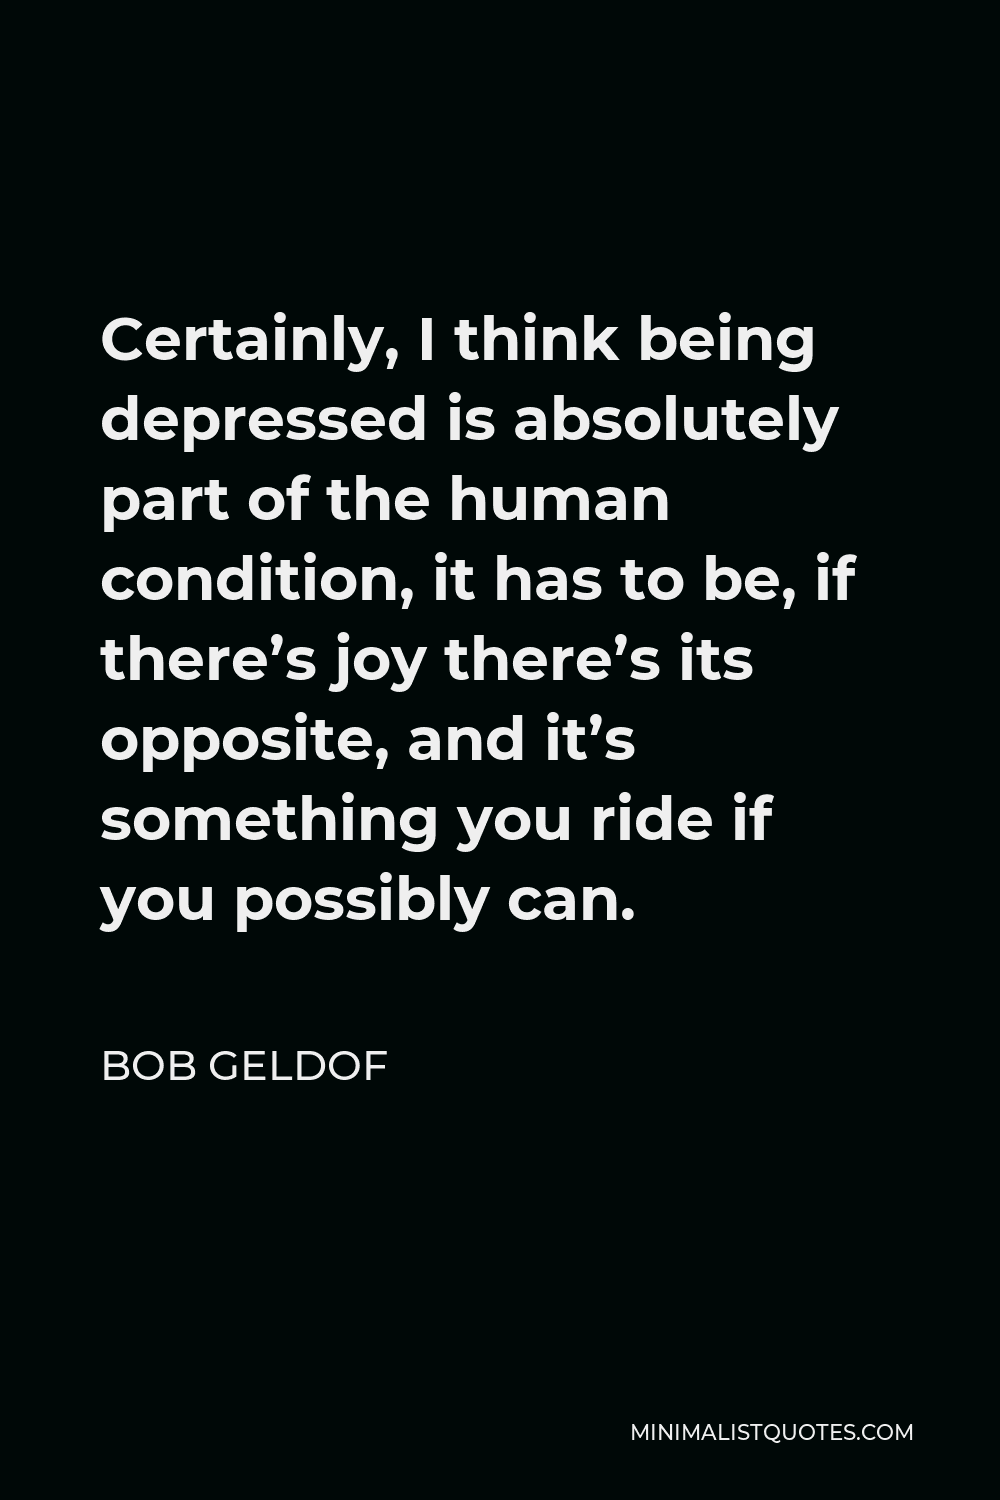 Bob Geldof Quote - Certainly, I think being depressed is absolutely part of the human condition, it has to be, if there’s joy there’s its opposite, and it’s something you ride if you possibly can.